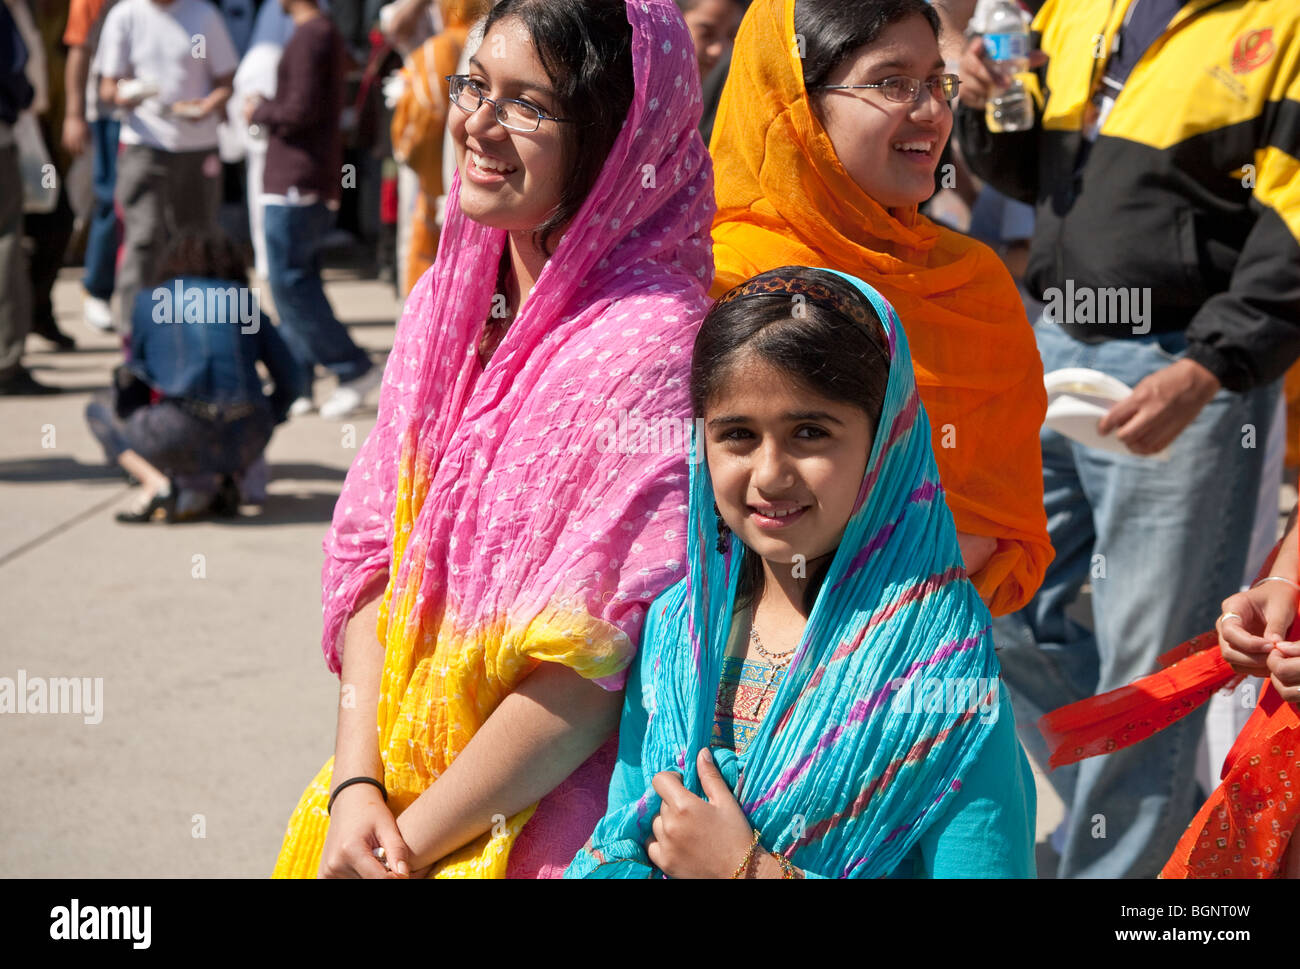 Annual spring Vaisakhi parade in Toronto, celebrating the Sikh culture ...